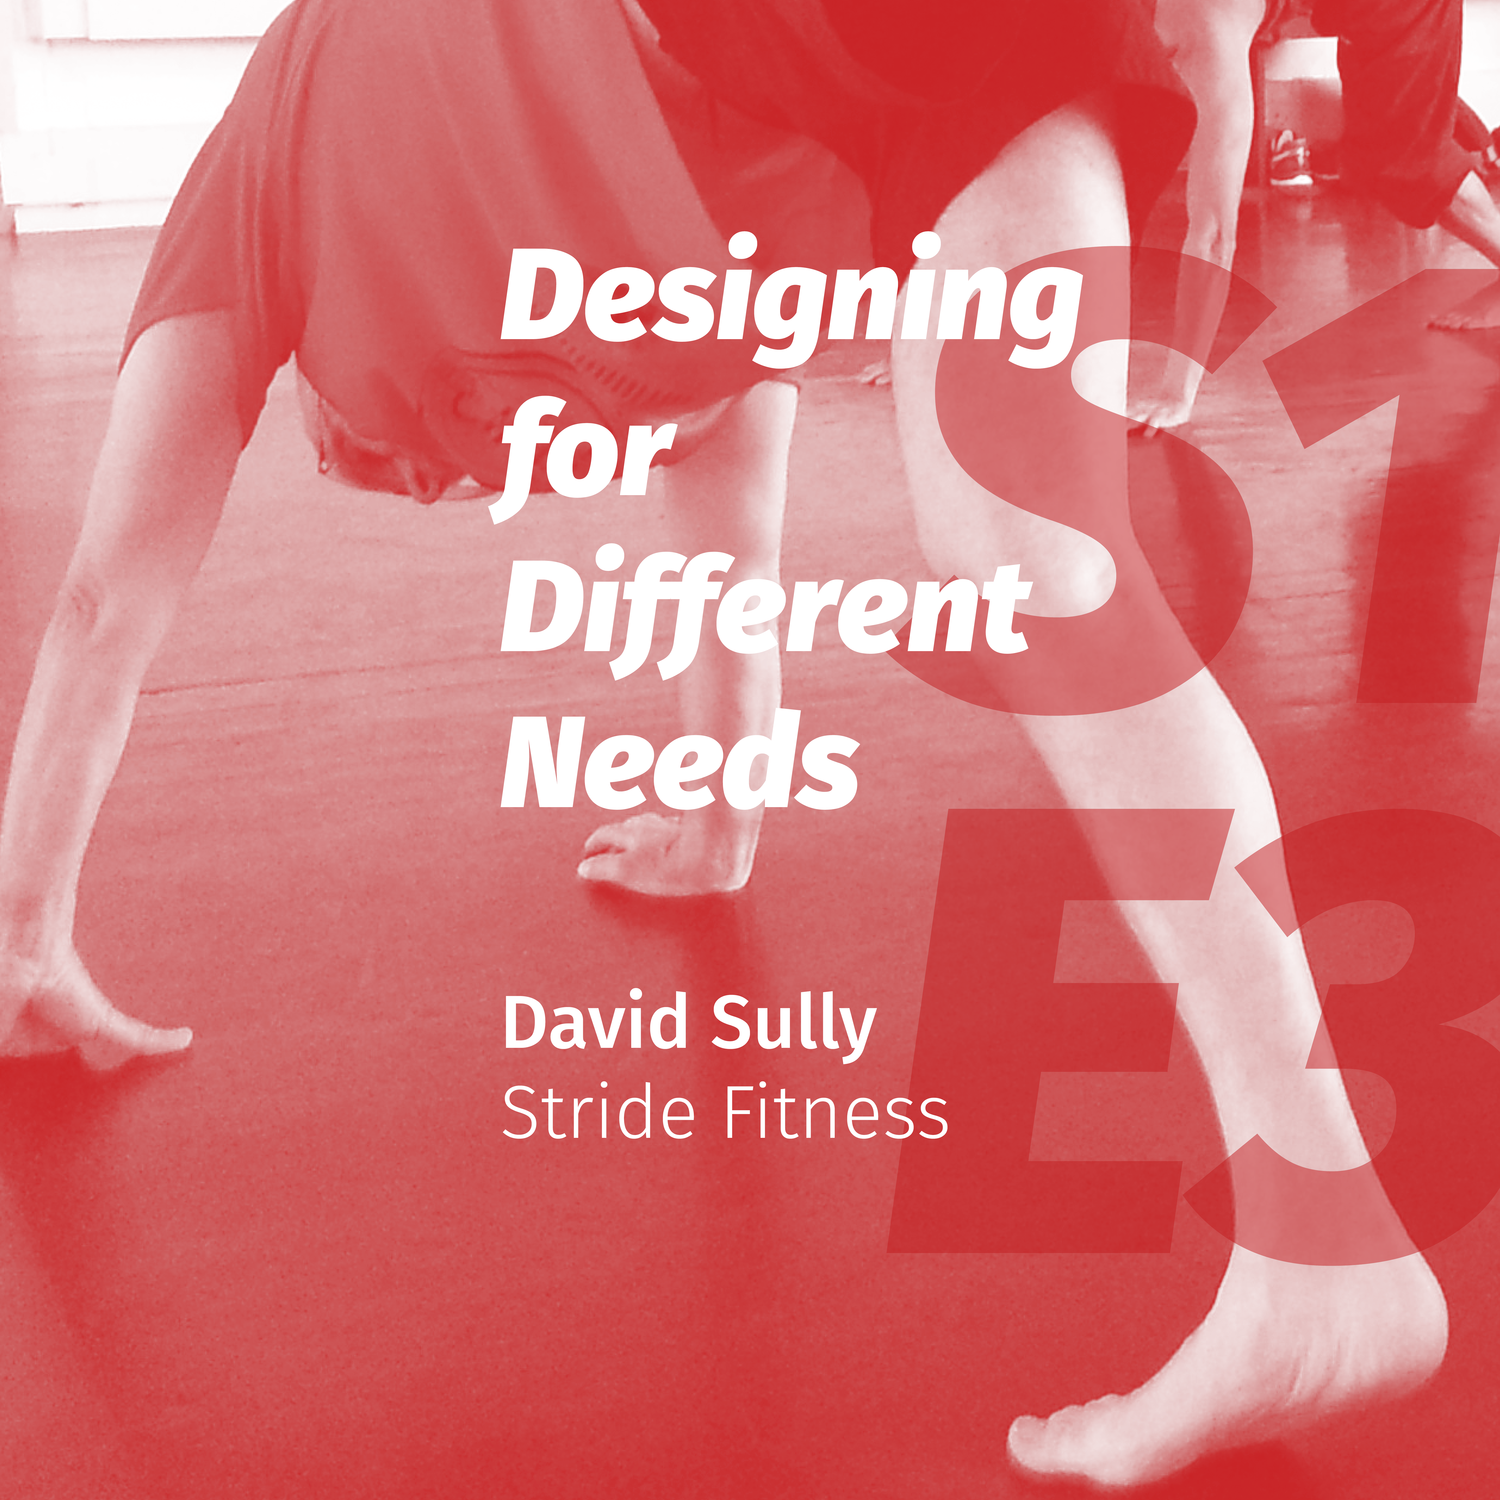 Designing for Different Needs with David Sully of Stride Fitness